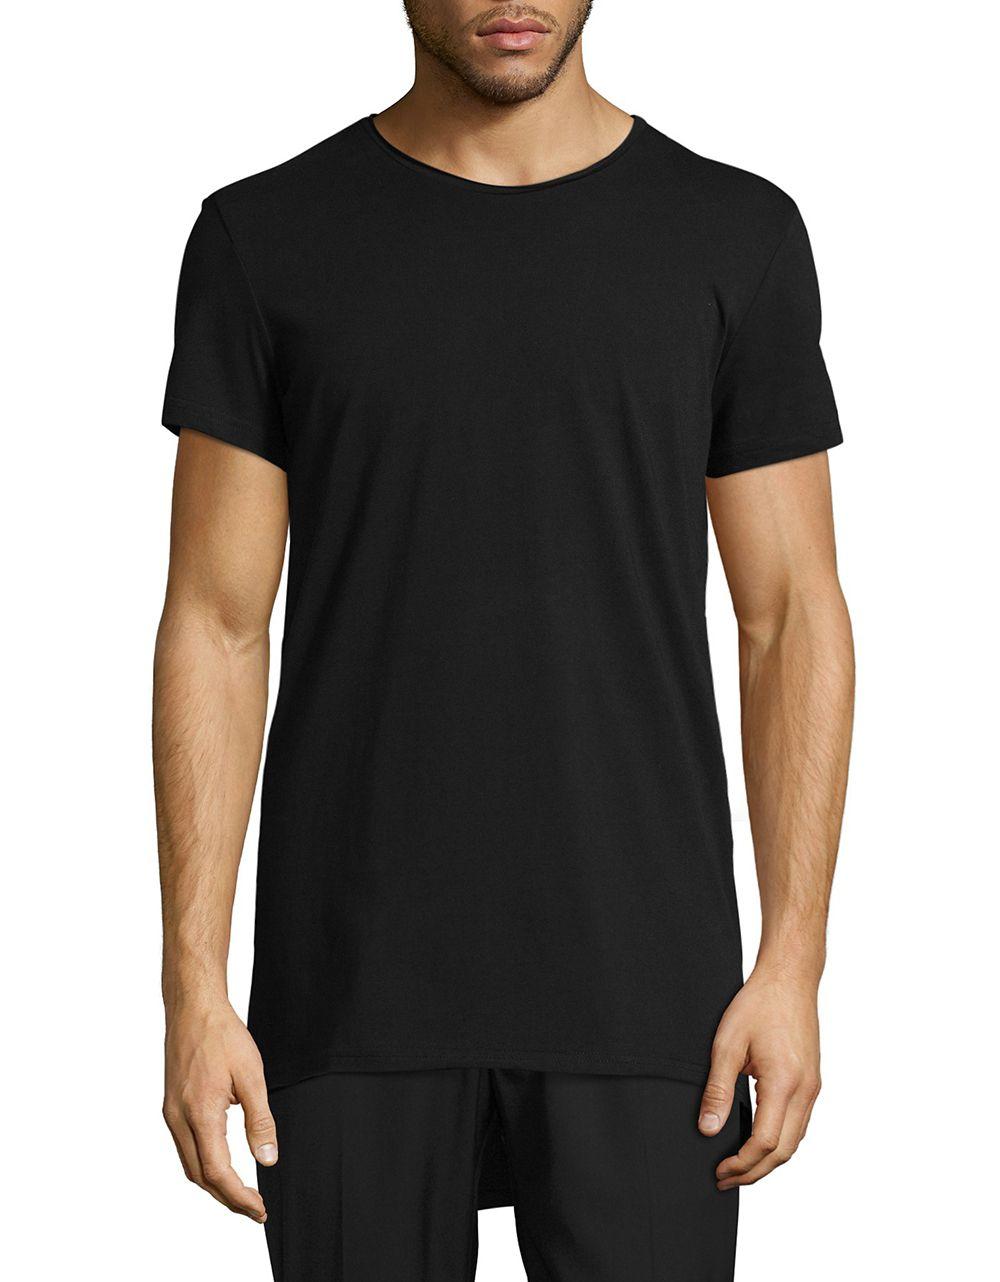 Lyst - Vitaly Long Cotton Tee in Black for Men